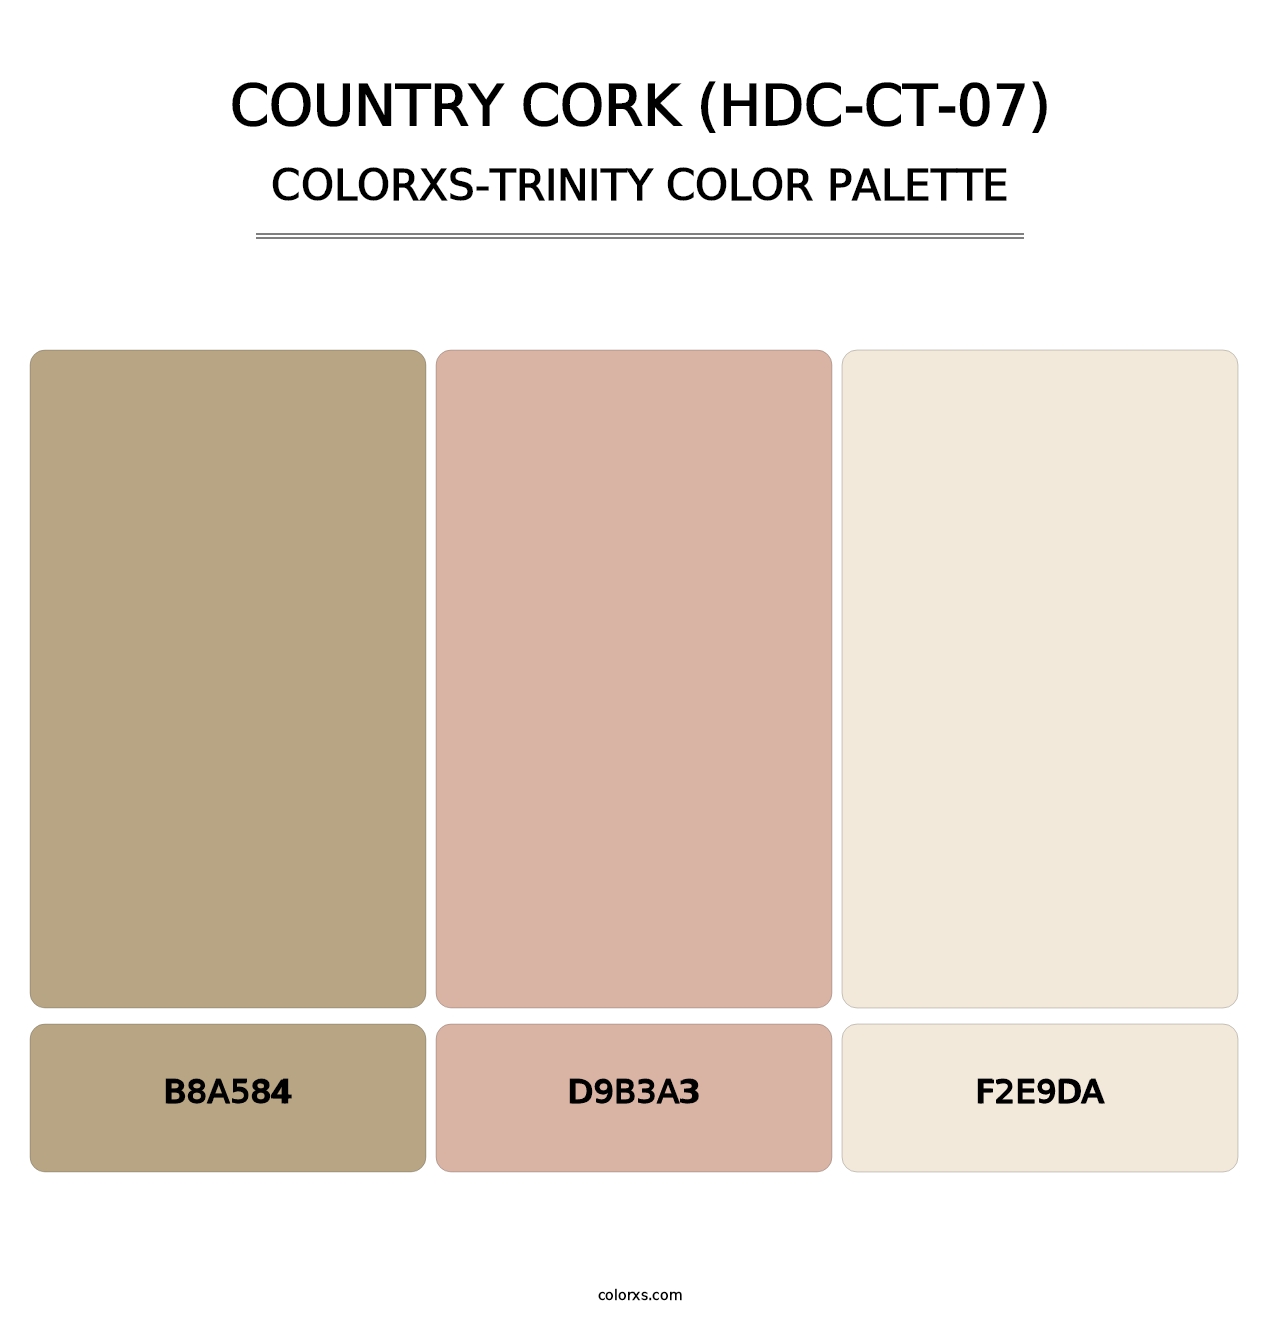 Country Cork (HDC-CT-07) - Colorxs Trinity Palette